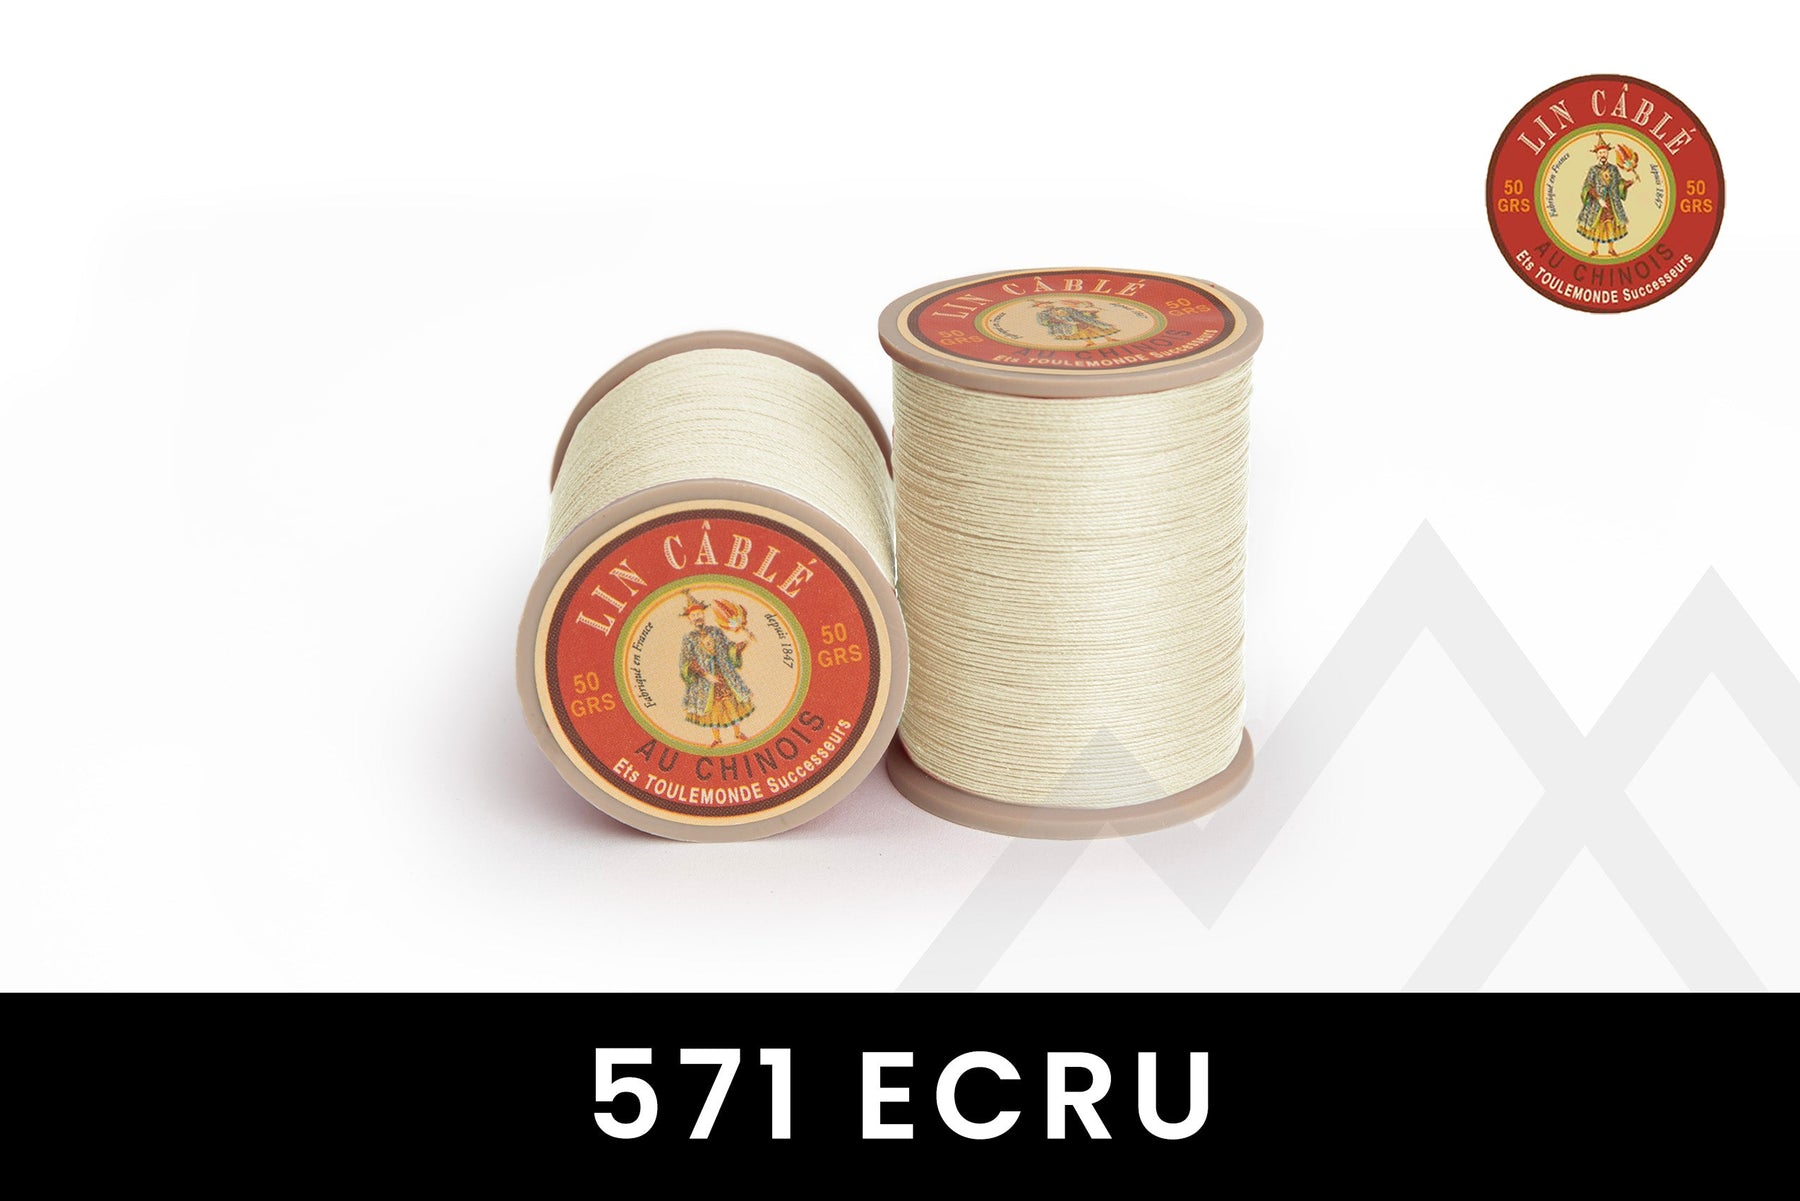 Fil au Chinois 🇫🇷 - "Lin Cable" Waxed Linen Thread (Size 432) *15 Meters